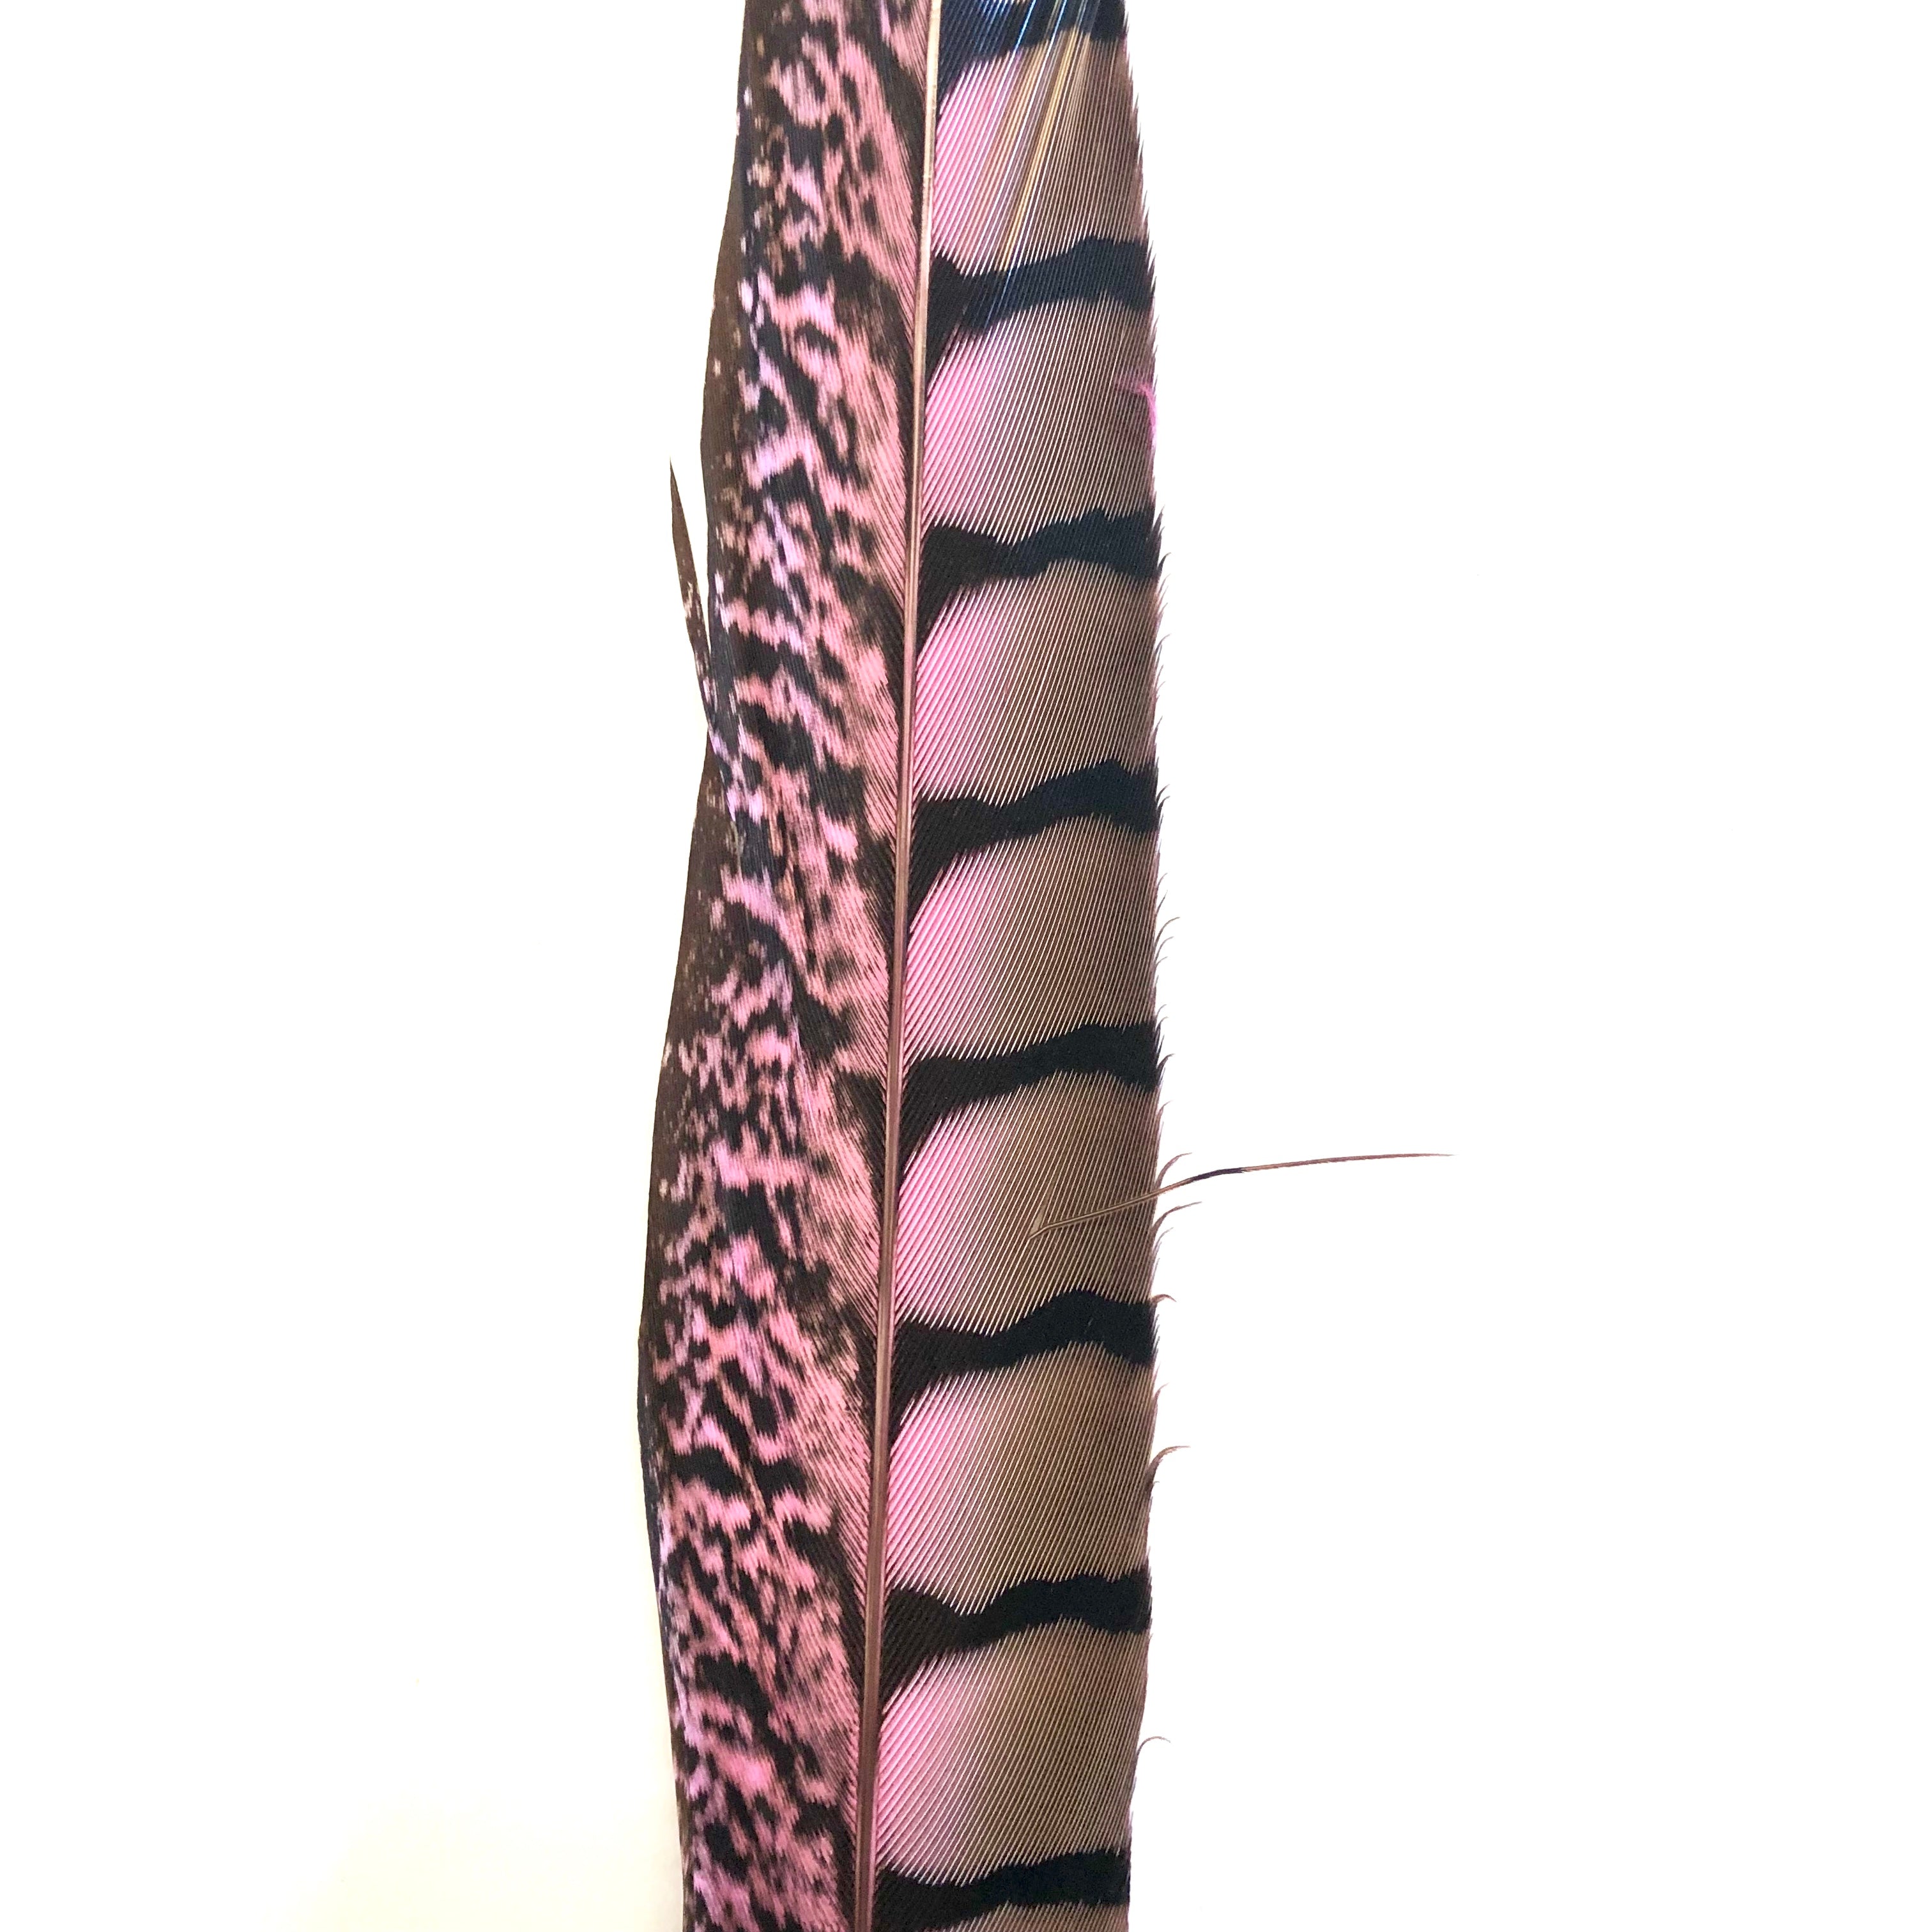 20" to 30" Lady Amherst Pheasant Side Tail Feather - Pink